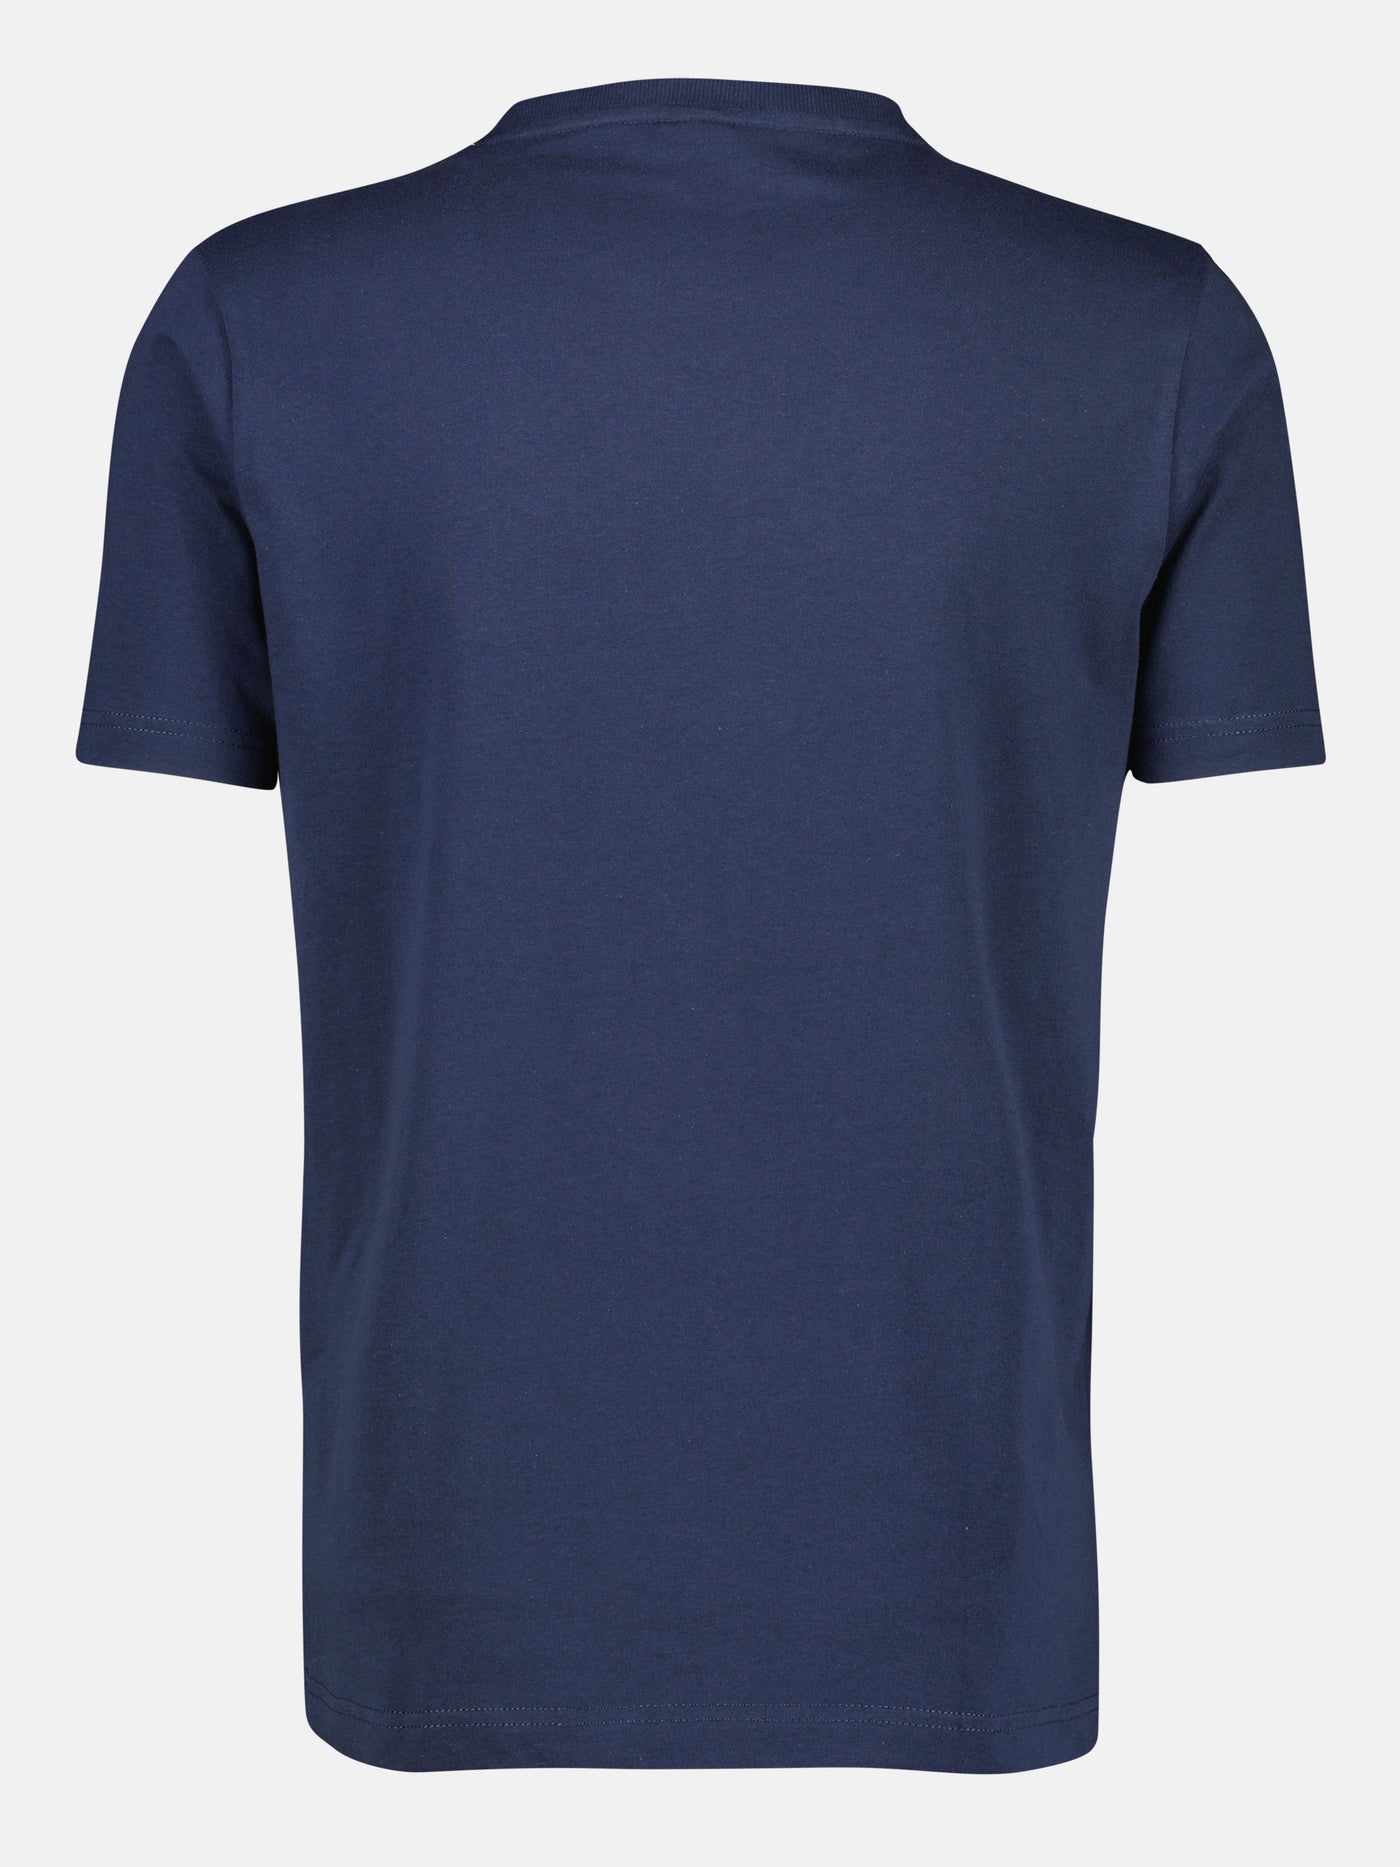 Round neck t-shirt with large logo print